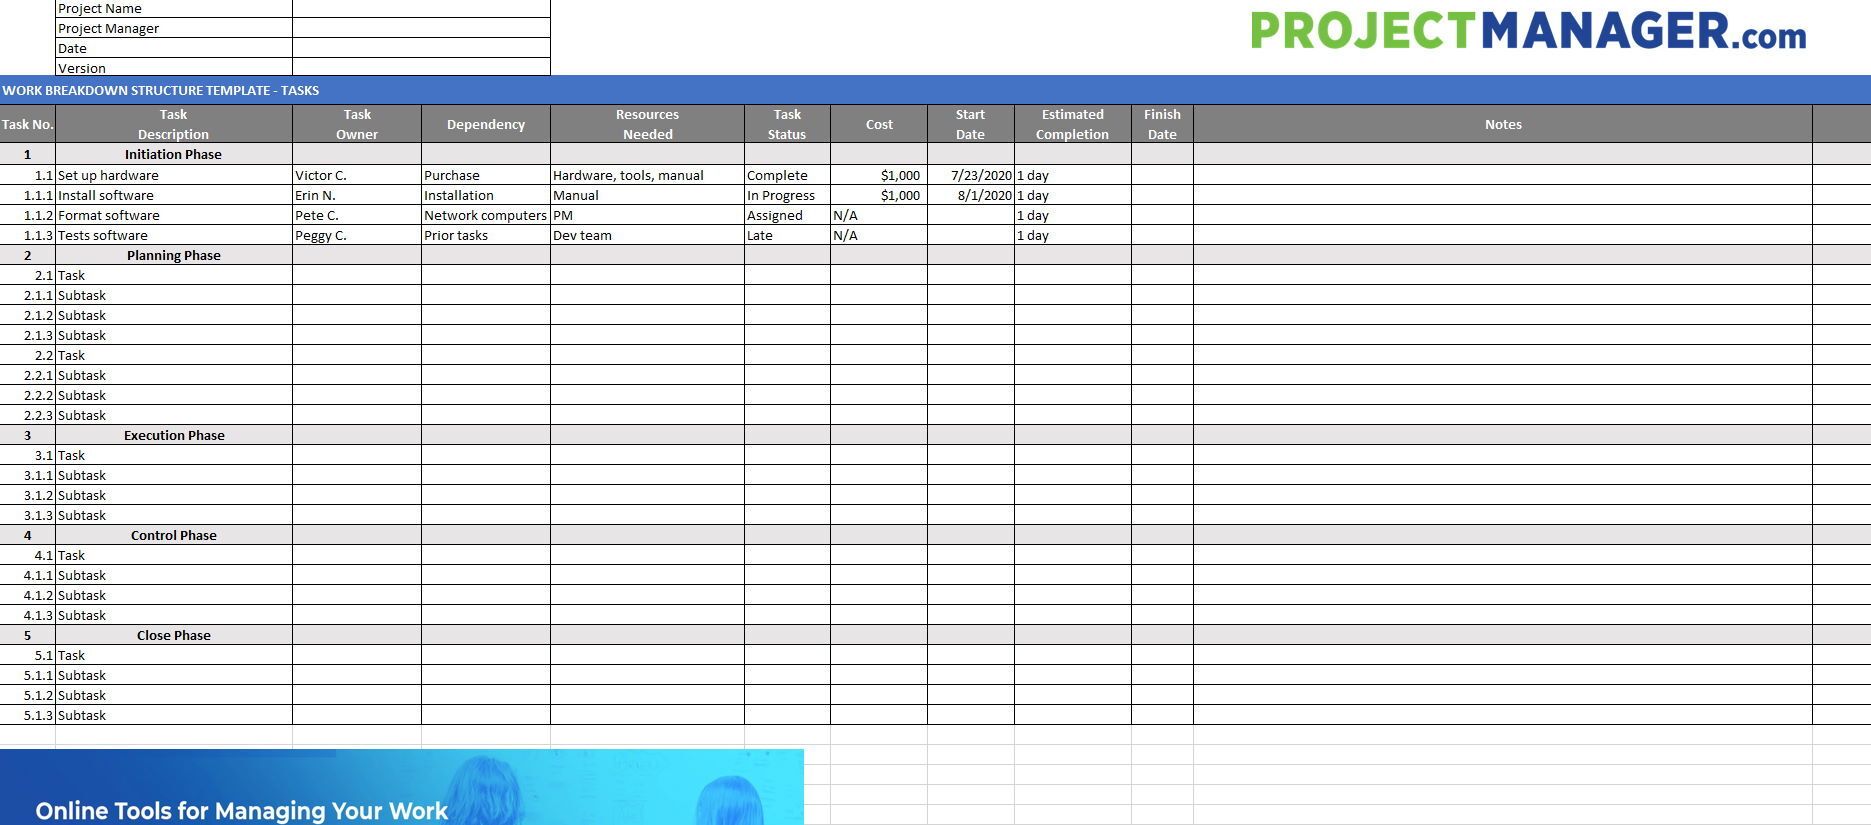 A screenshot of the Work Breakdown Structure template from ProjectManager.com.